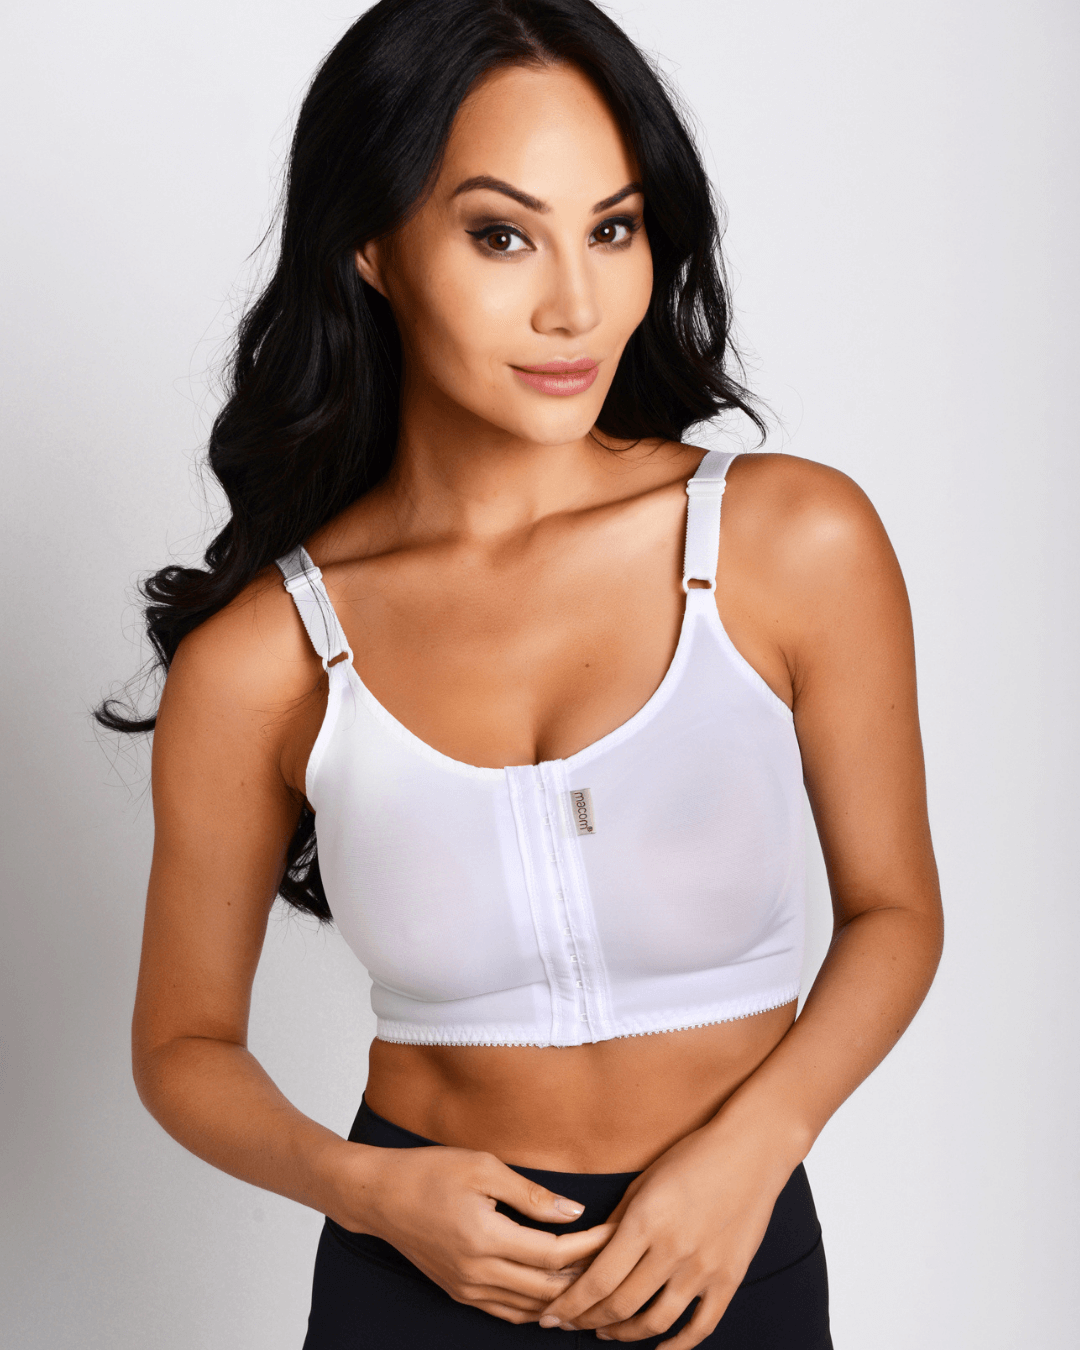 Macom Signature bra in white, post breast surgery compression bra with front fastening 